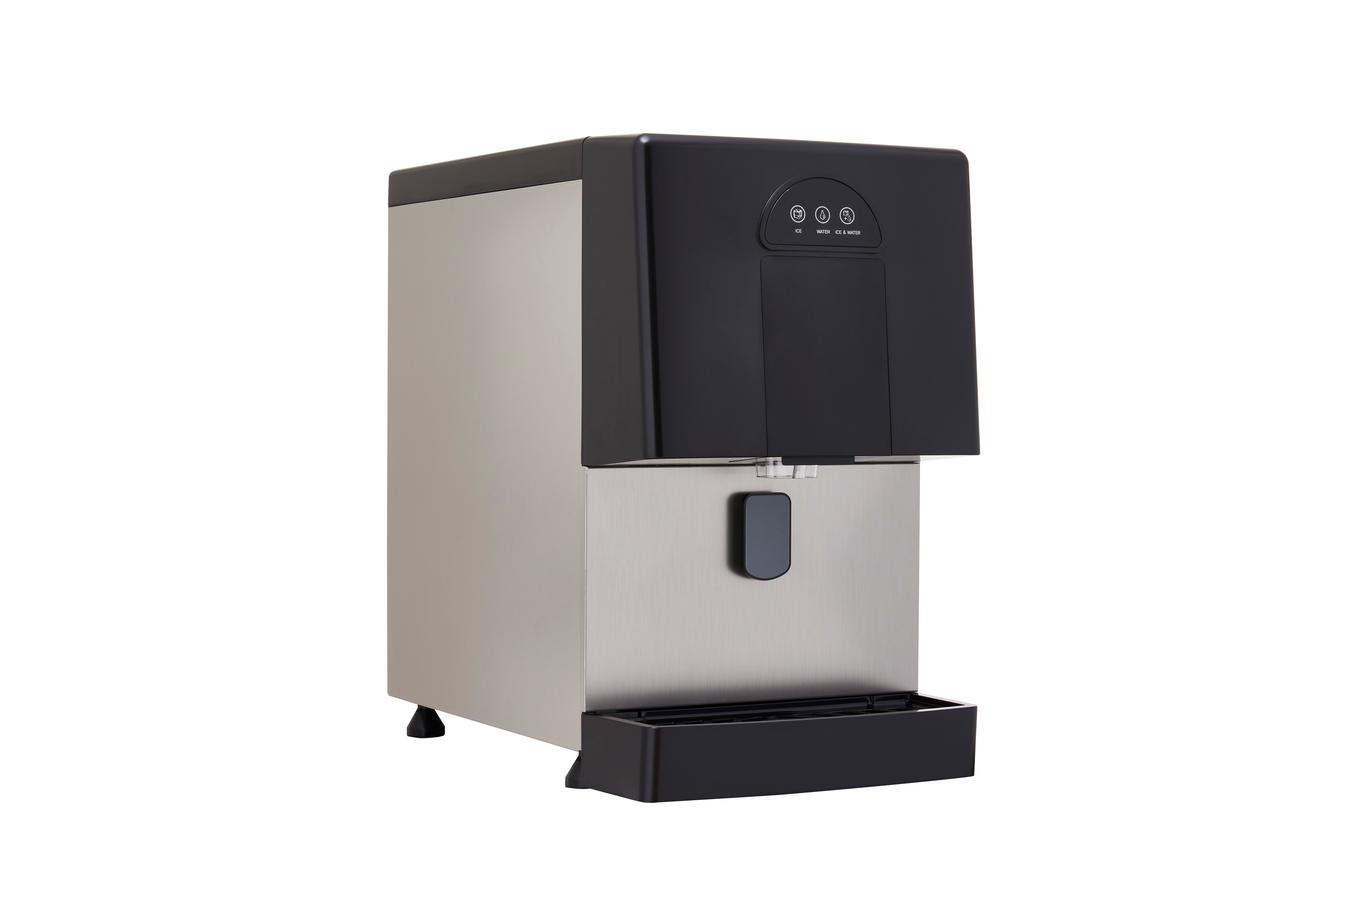 Icetro - ID-0160-AN, Commercial Air Cooled Ice Machine and Water Dispenser  Ice Nugget Maker 160lbs